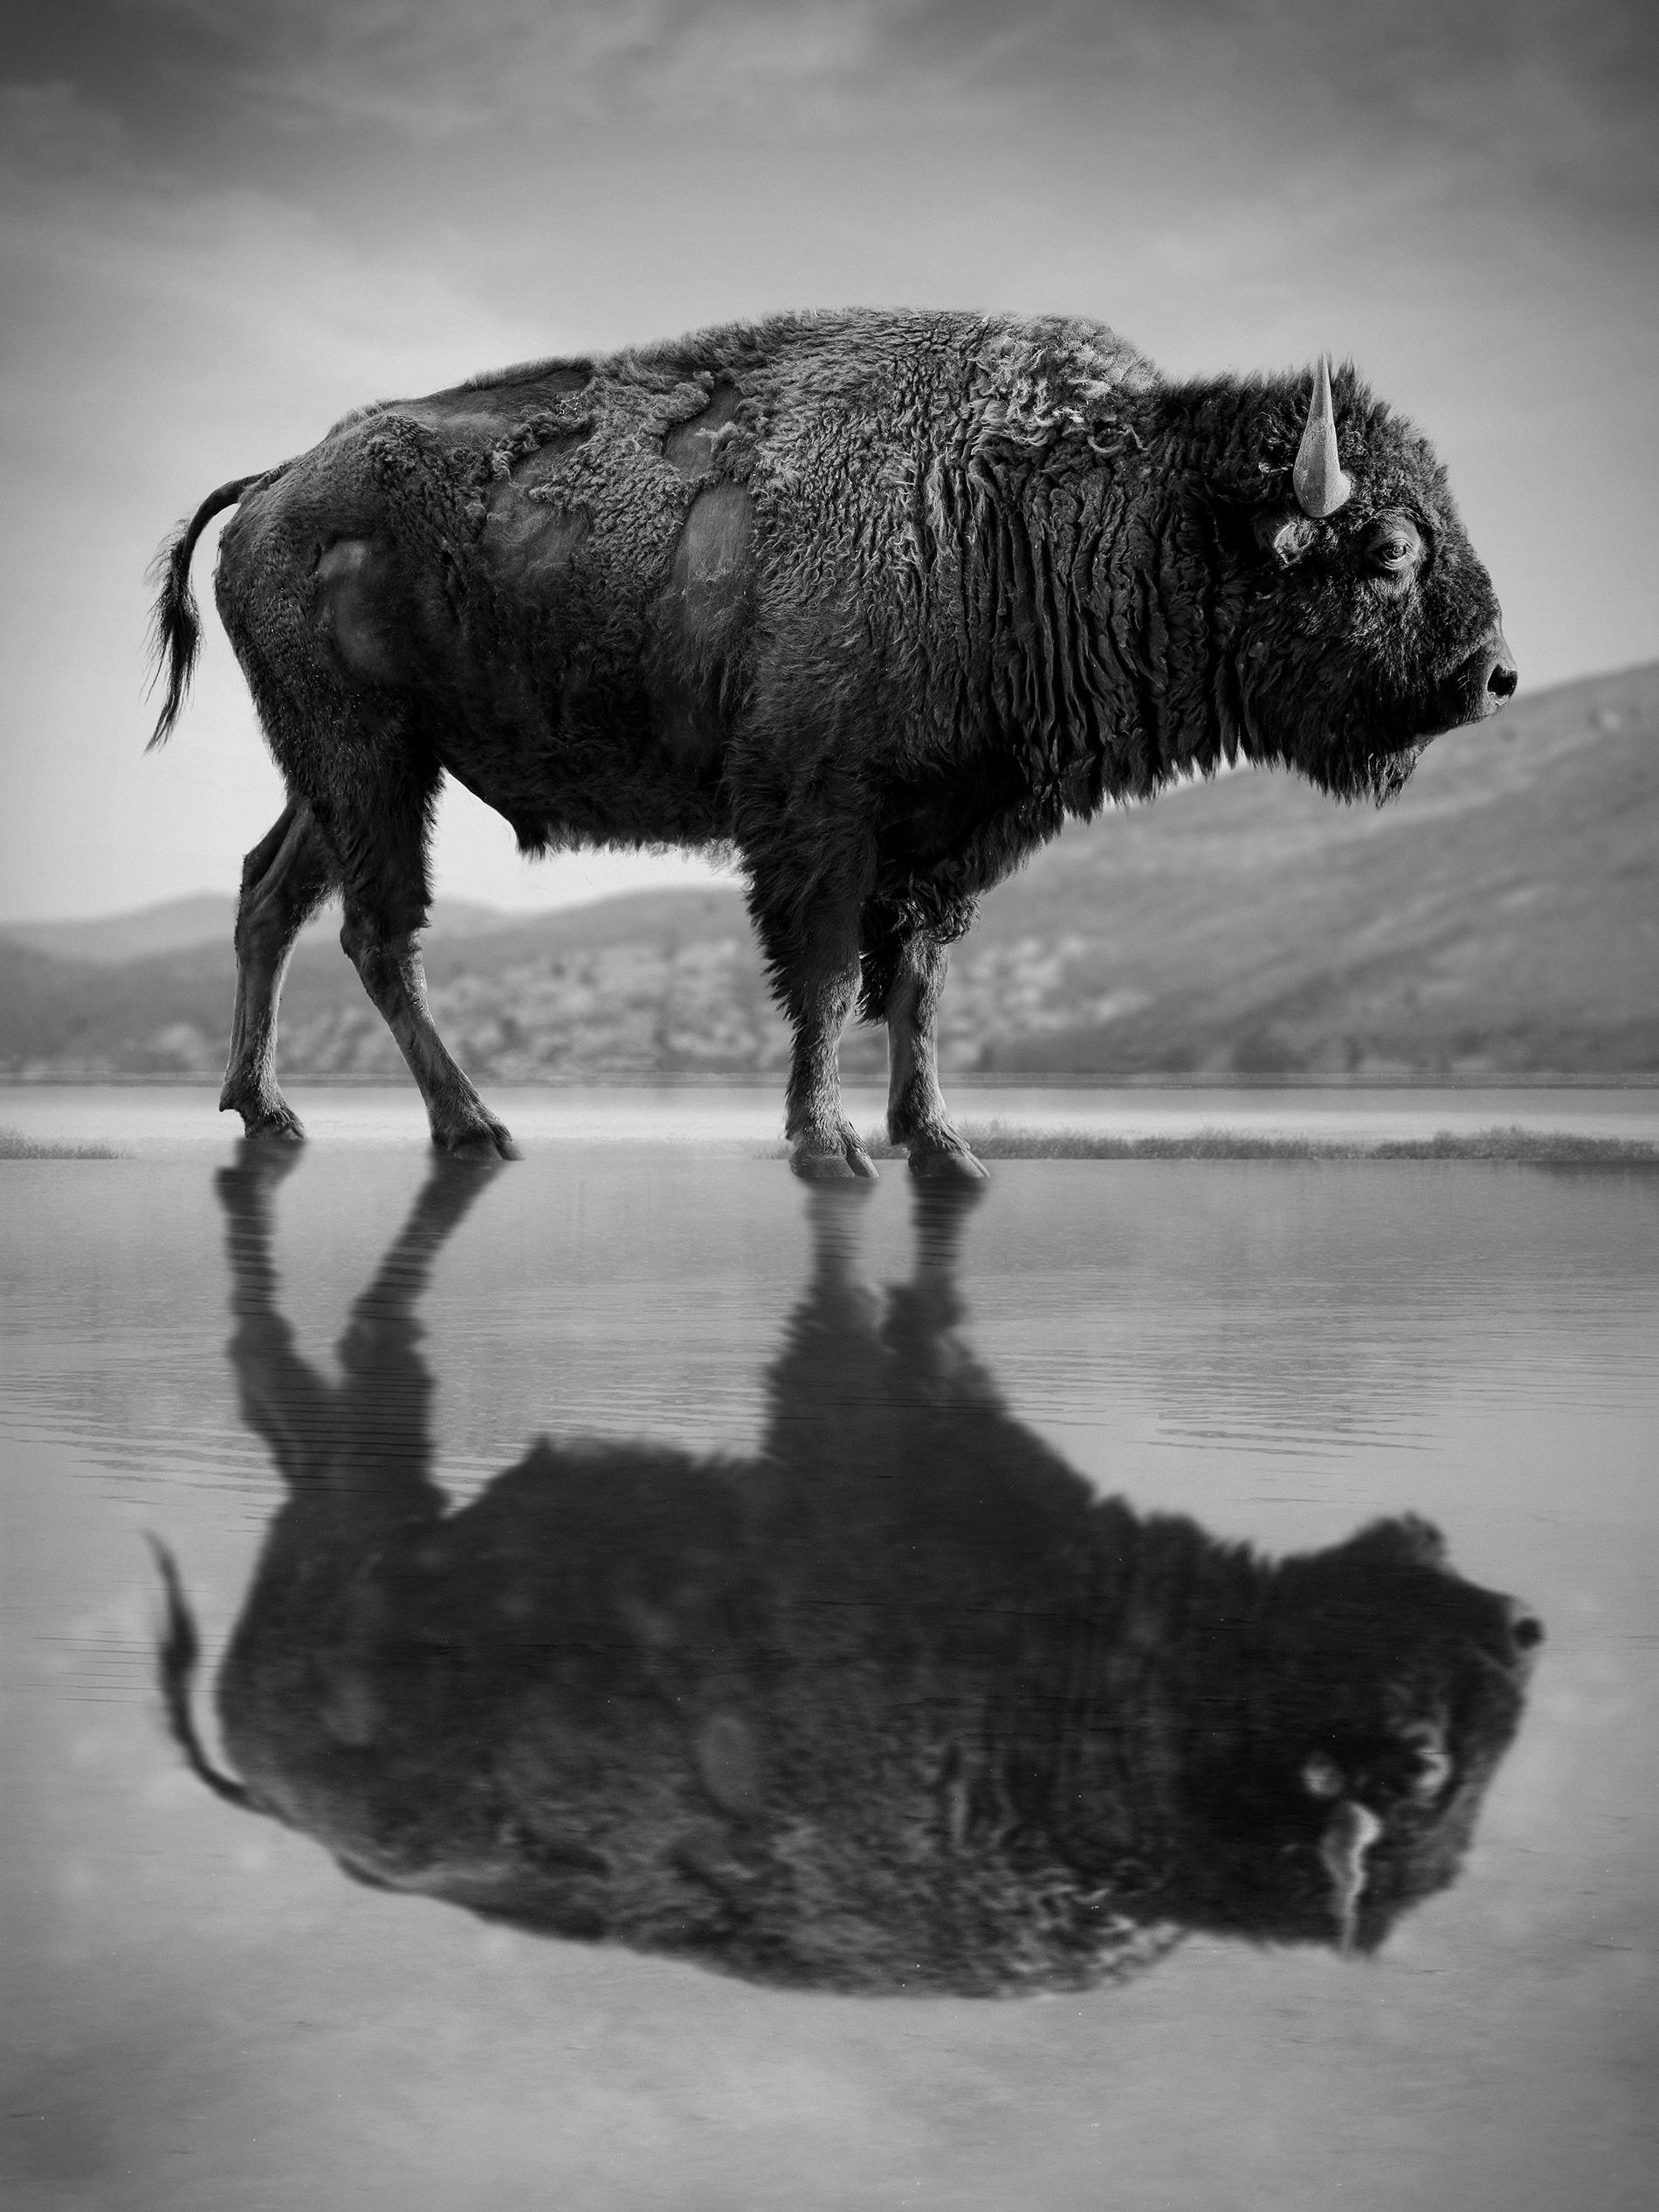 Shane Russeck Animal Print - "Old World" 40x28  Black & White Photography Bison Buffalo Unsigned Photograph 